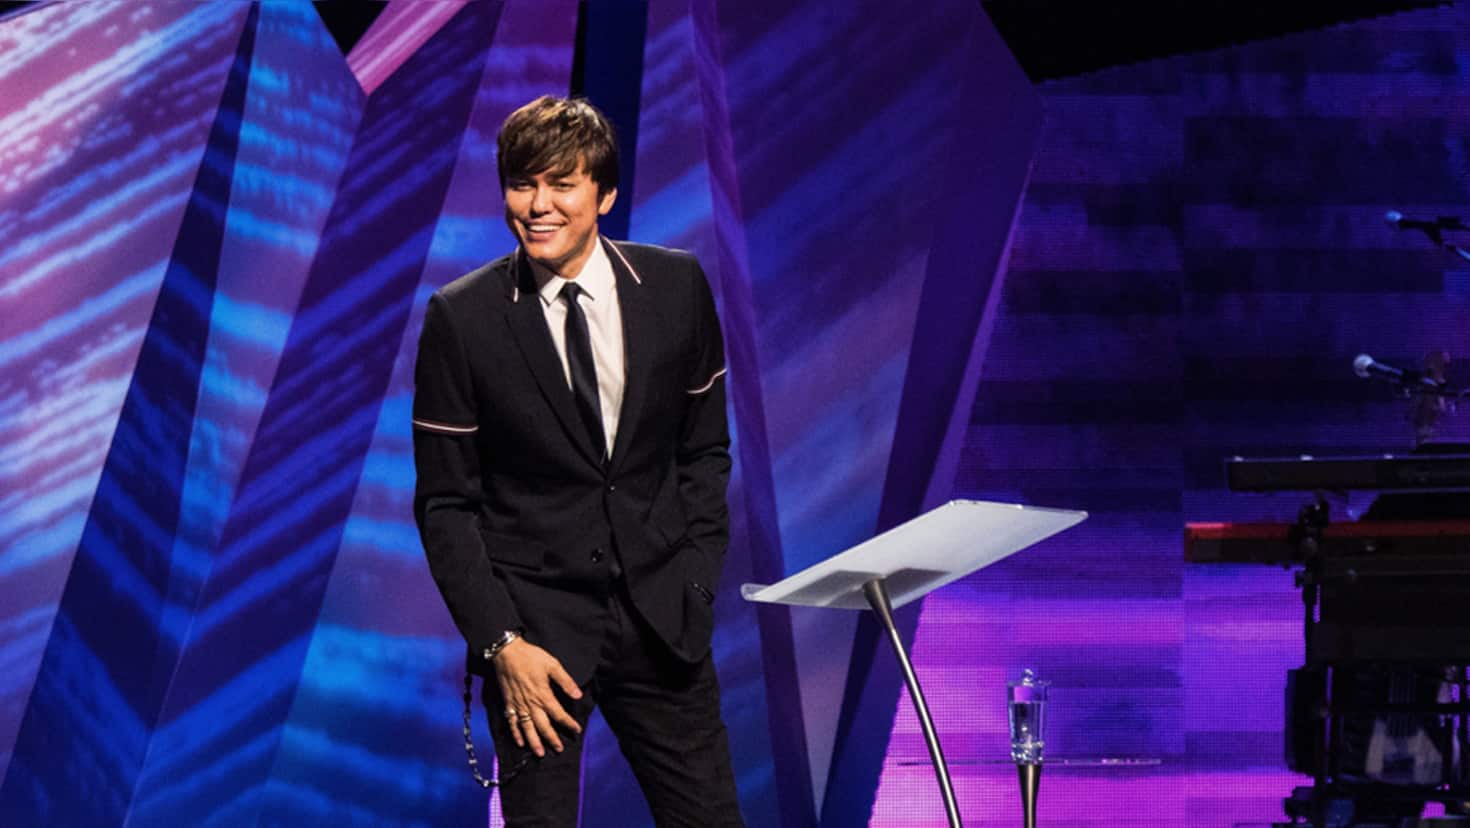 One of my favorite sermons: ‘Give Me This Mountain’ by Pastor Joseph Prince